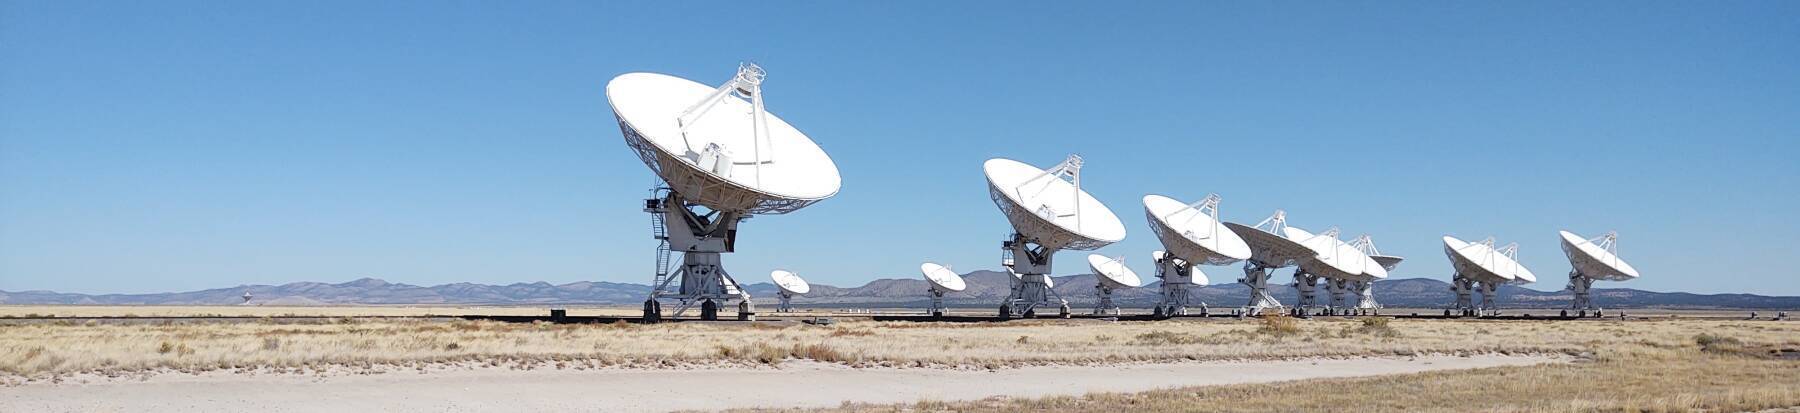 Very Large Array west of Socorro, New Mexico.